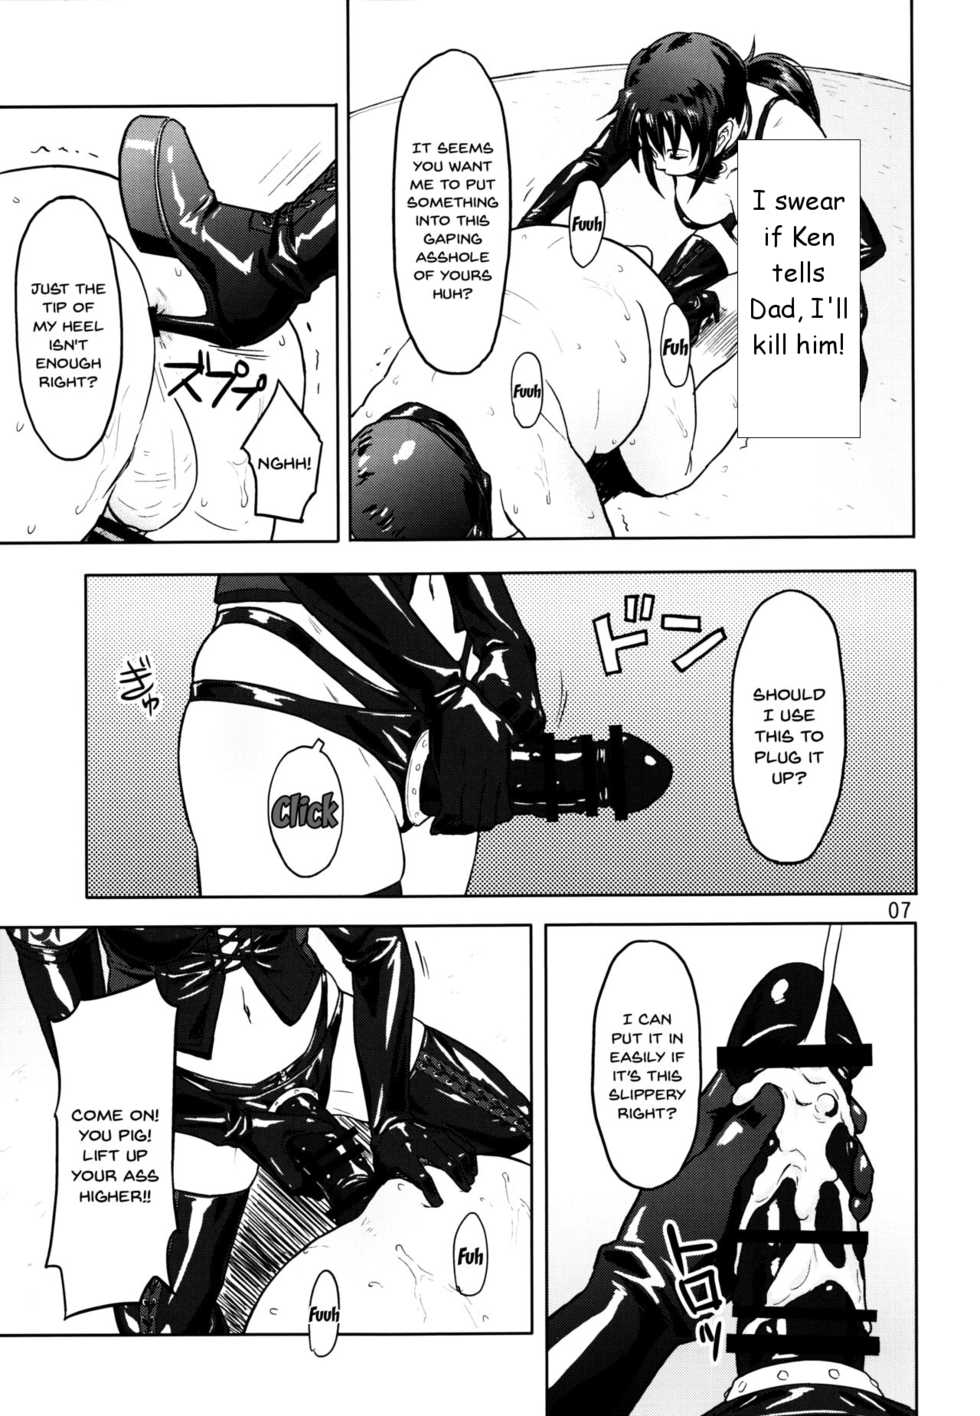 My Sister Is A Pornstar Part 1 [Rewrite] - Page 12